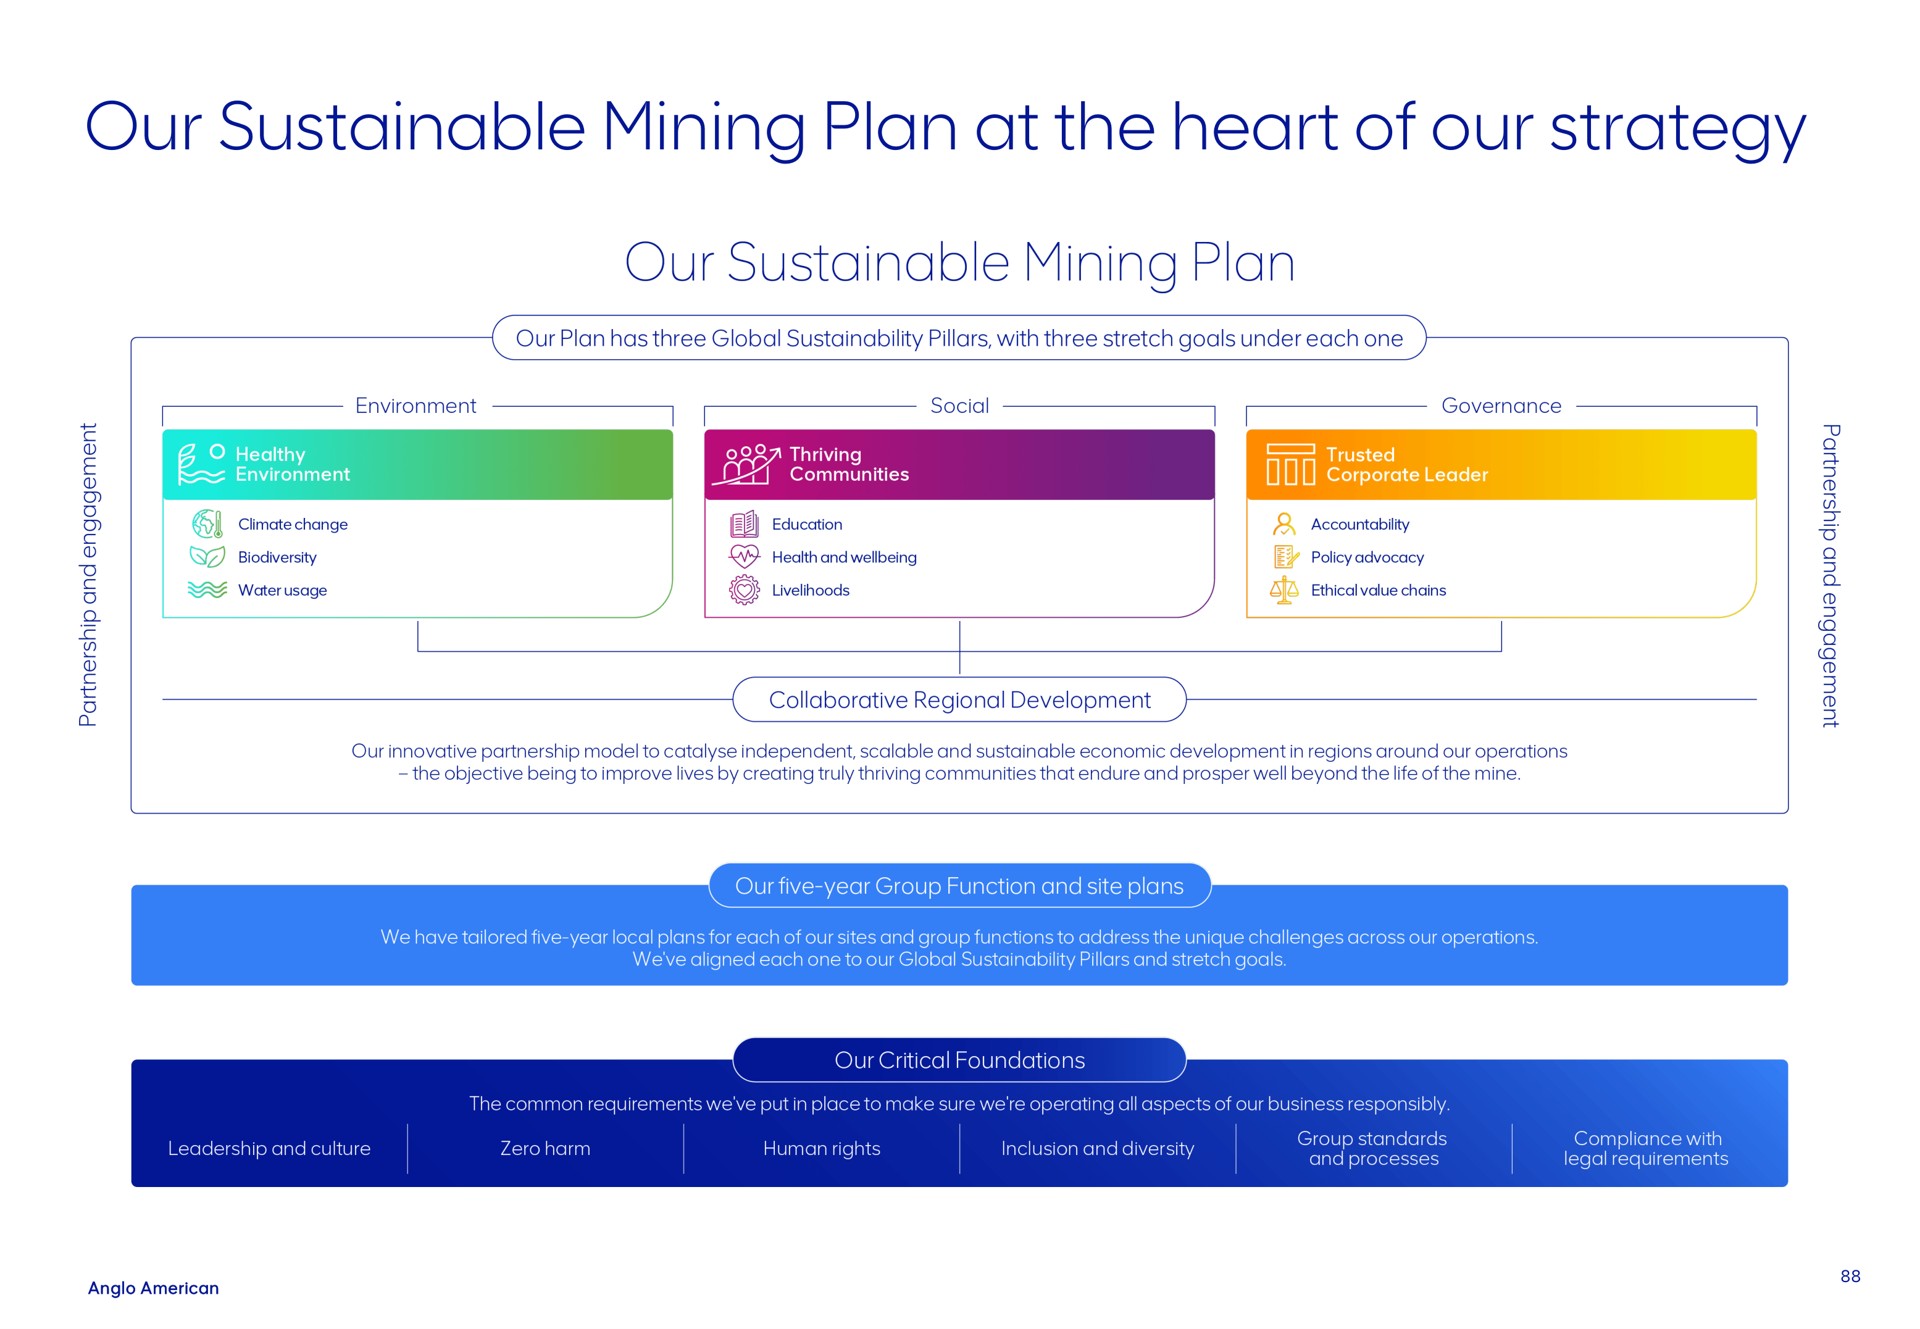 our sustainable mining plan at the heart of our strategy a a i a has three global pillars with three stretch goals under each one communities social environment tara climate change education water usage health and livelihoods accountability policy advocacy ethical value chains governance innovative partnership model to independent scalable and economic development in regions around operations objective being to improve lives by creating truly thriving communities that endure and prosper well beyond life mine collaborative regional development five year we have tailored five year local plans for each sites and group functions to address unique challenges across operations we aligned each one to global pillars and stretch goals i i critical foundations leadership and culture zero harm human rights inclusion and diversity group standards and processes compliance with legal requirements common requirements we put in place to make sure we operating all aspects business responsibly | AngloAmerican